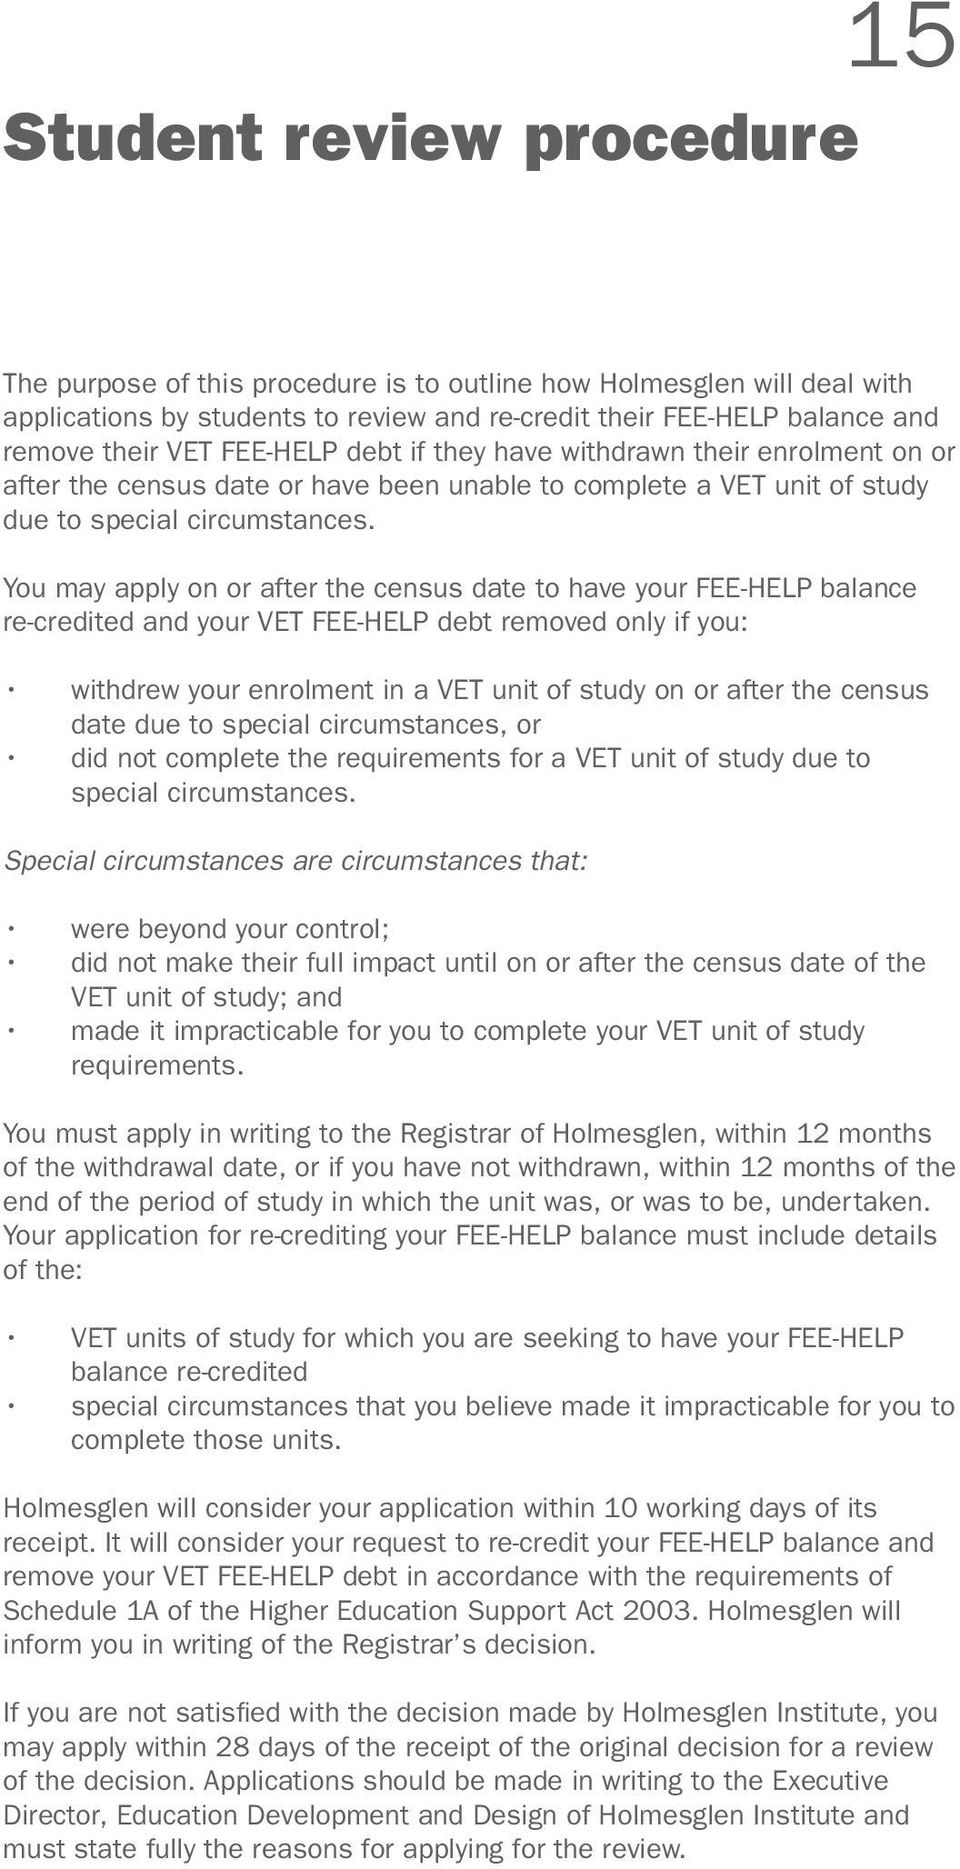 You may apply on or after the census date to have your FEE-HELP balance re-credited and your VET FEE-HELP debt removed only if you: withdrew your enrolment in a VET unit of study on or after the